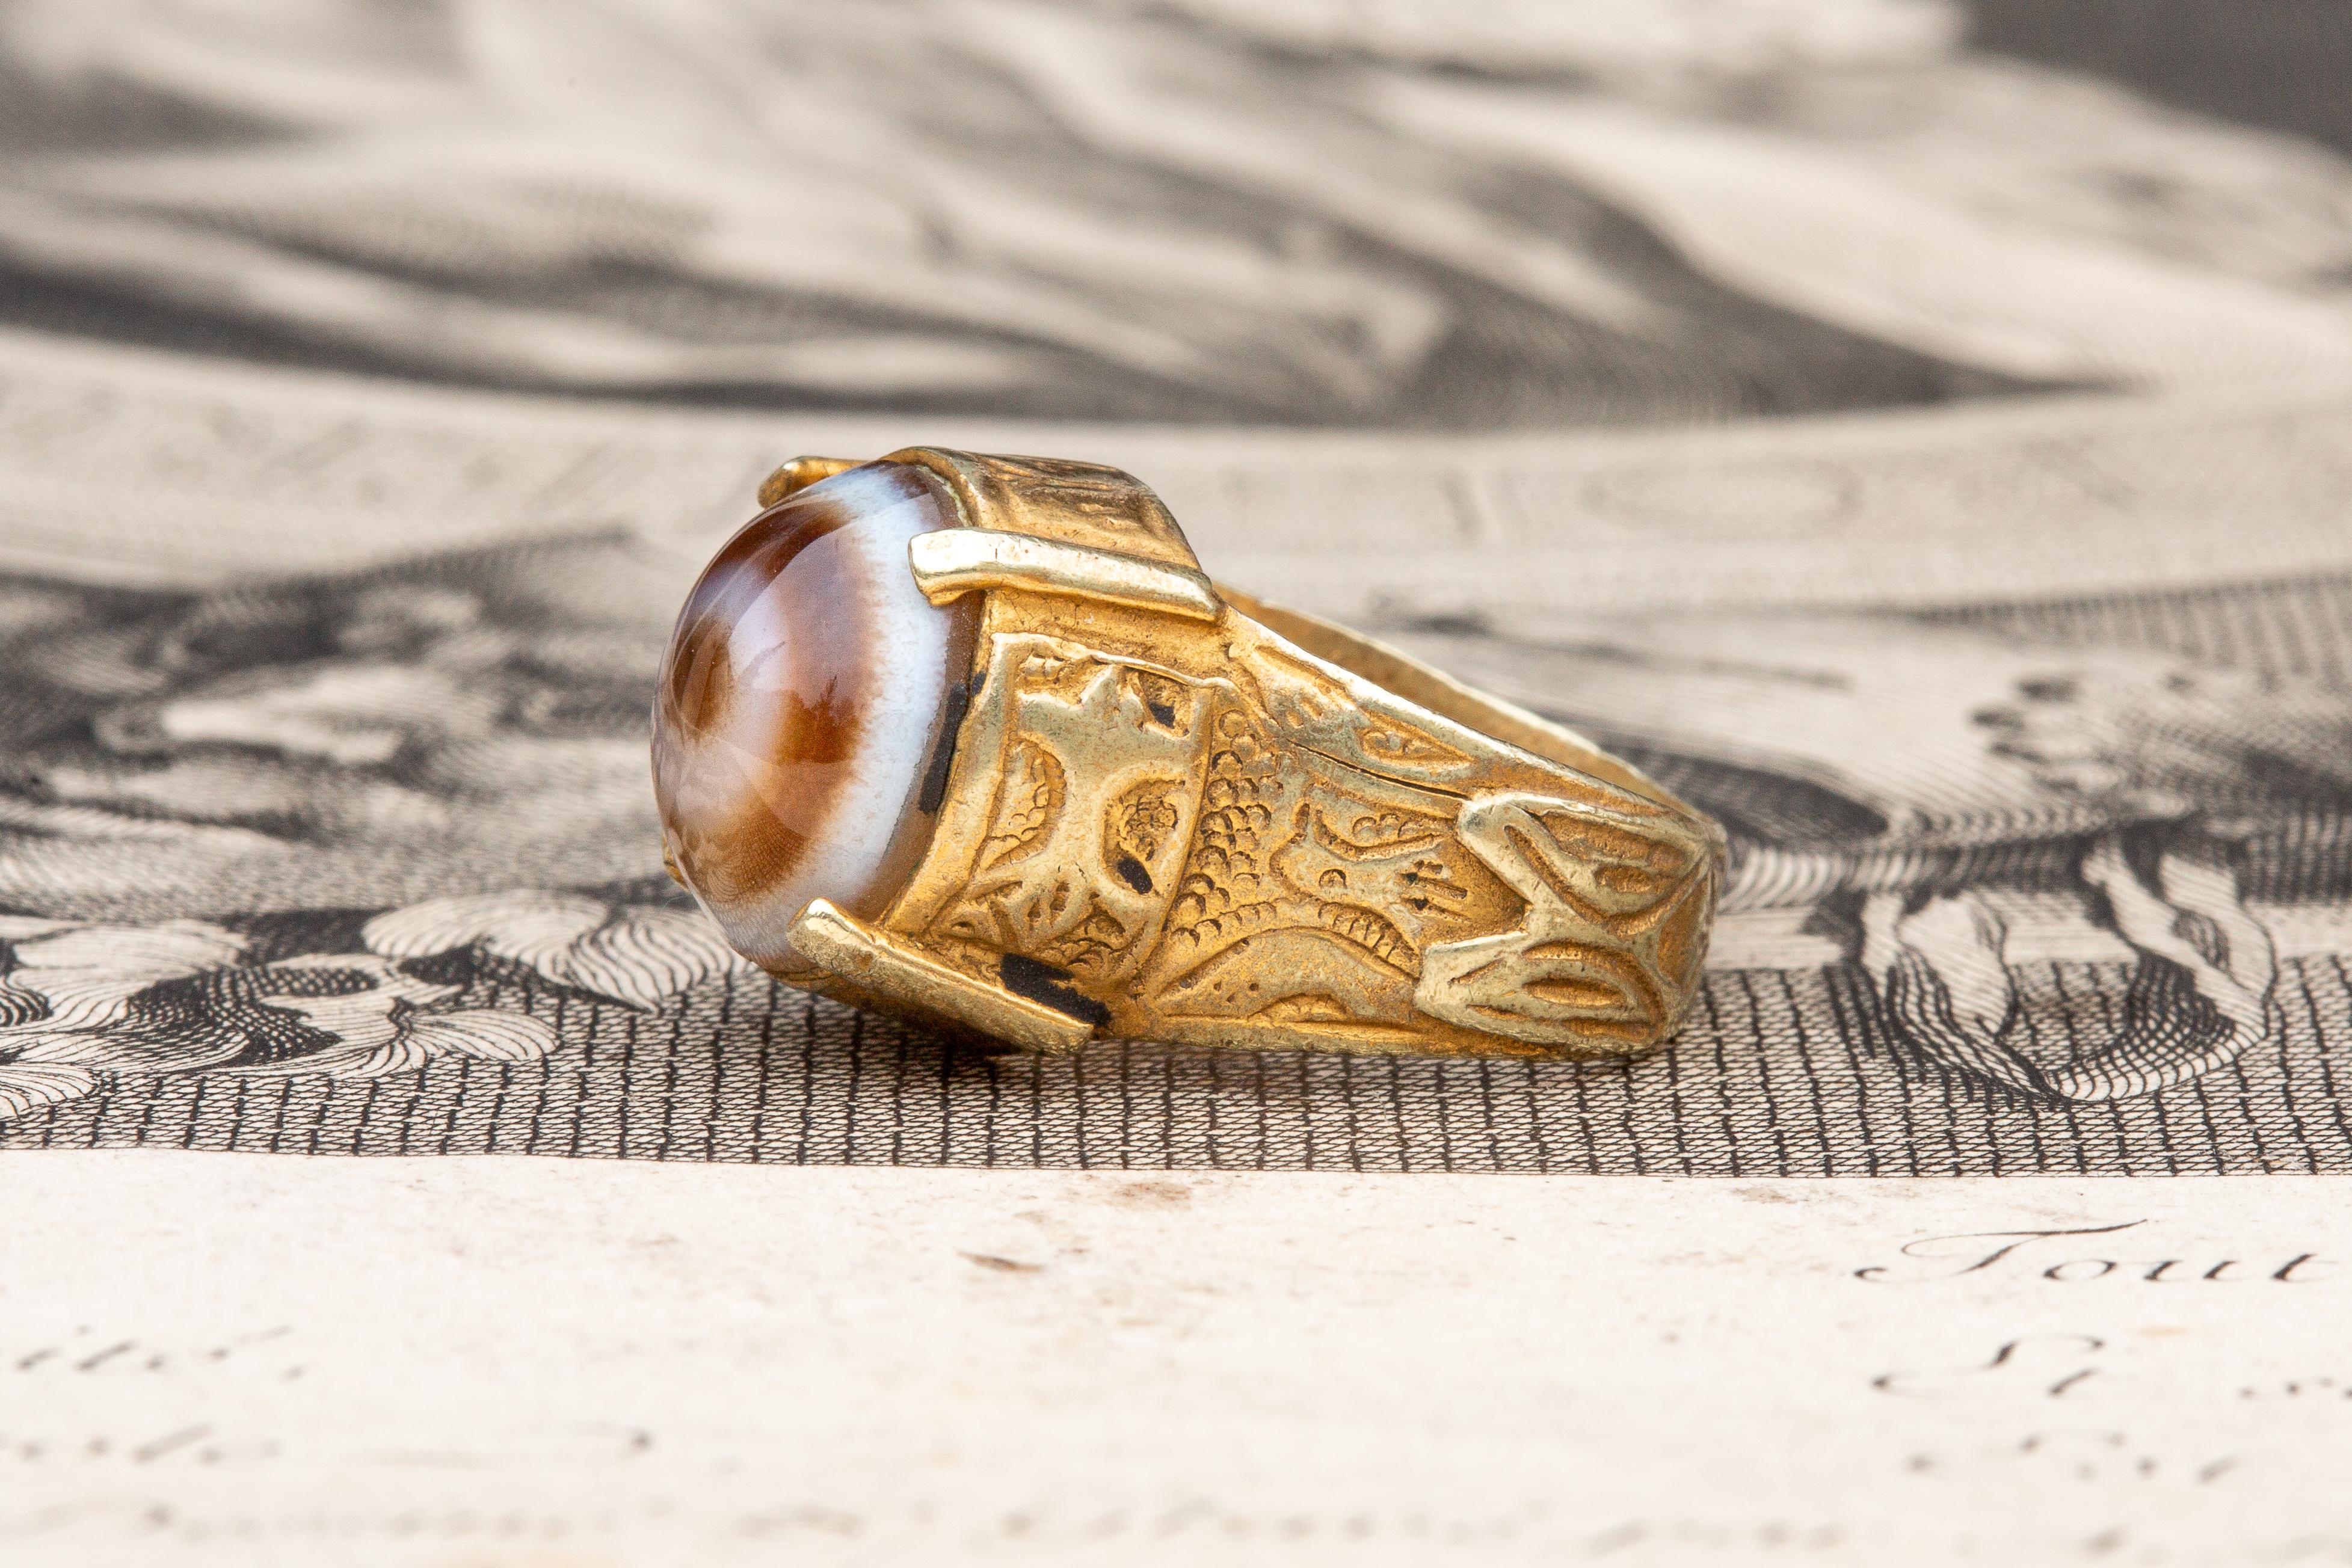 Cabochon Scarce 13th-14th Century Islamic Late Seljuk Empire Gold and Eye Agate Ring For Sale